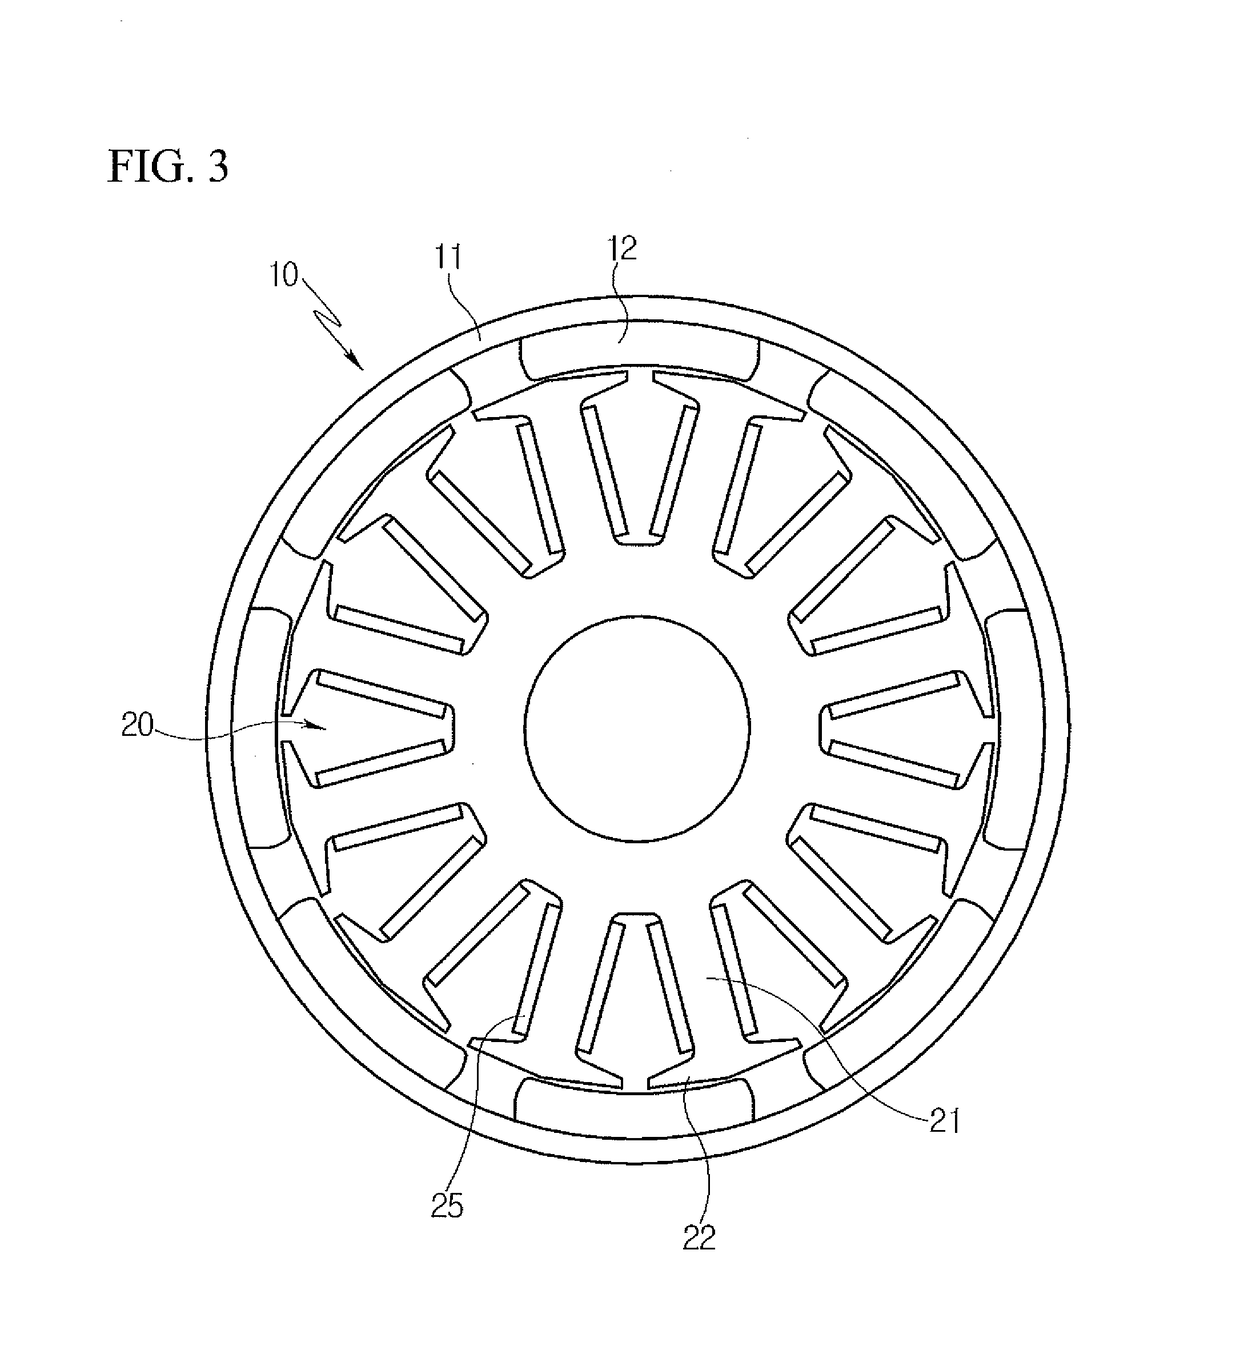 Brushless motor having a stator with teeth shaped to reduce cogging torque